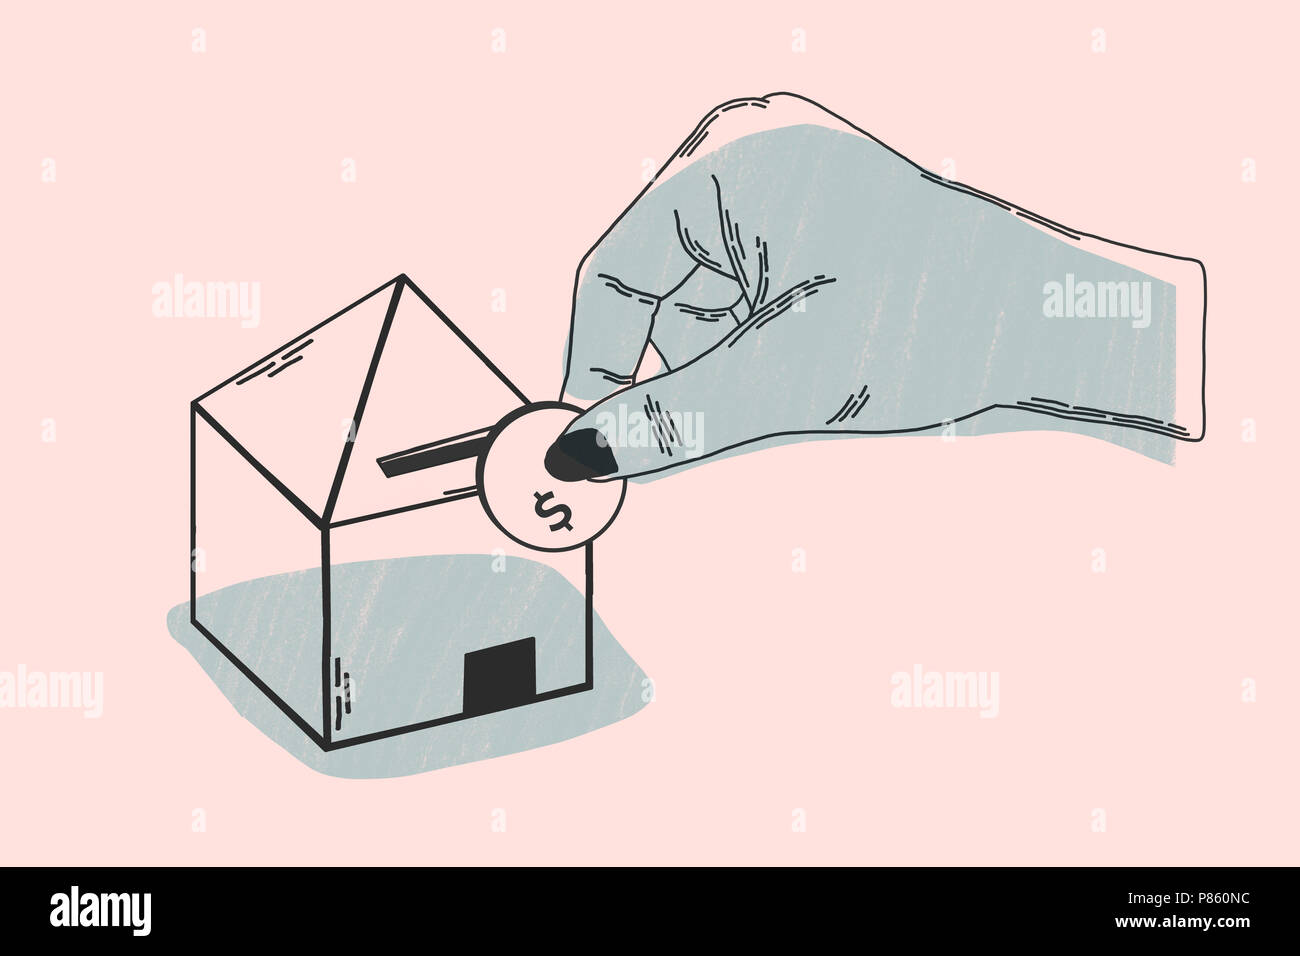 Investment of home purchase. Minimalist illustration concept. It shows metaphor of investment, with hand introducing currency in a household piggy. Stock Photo